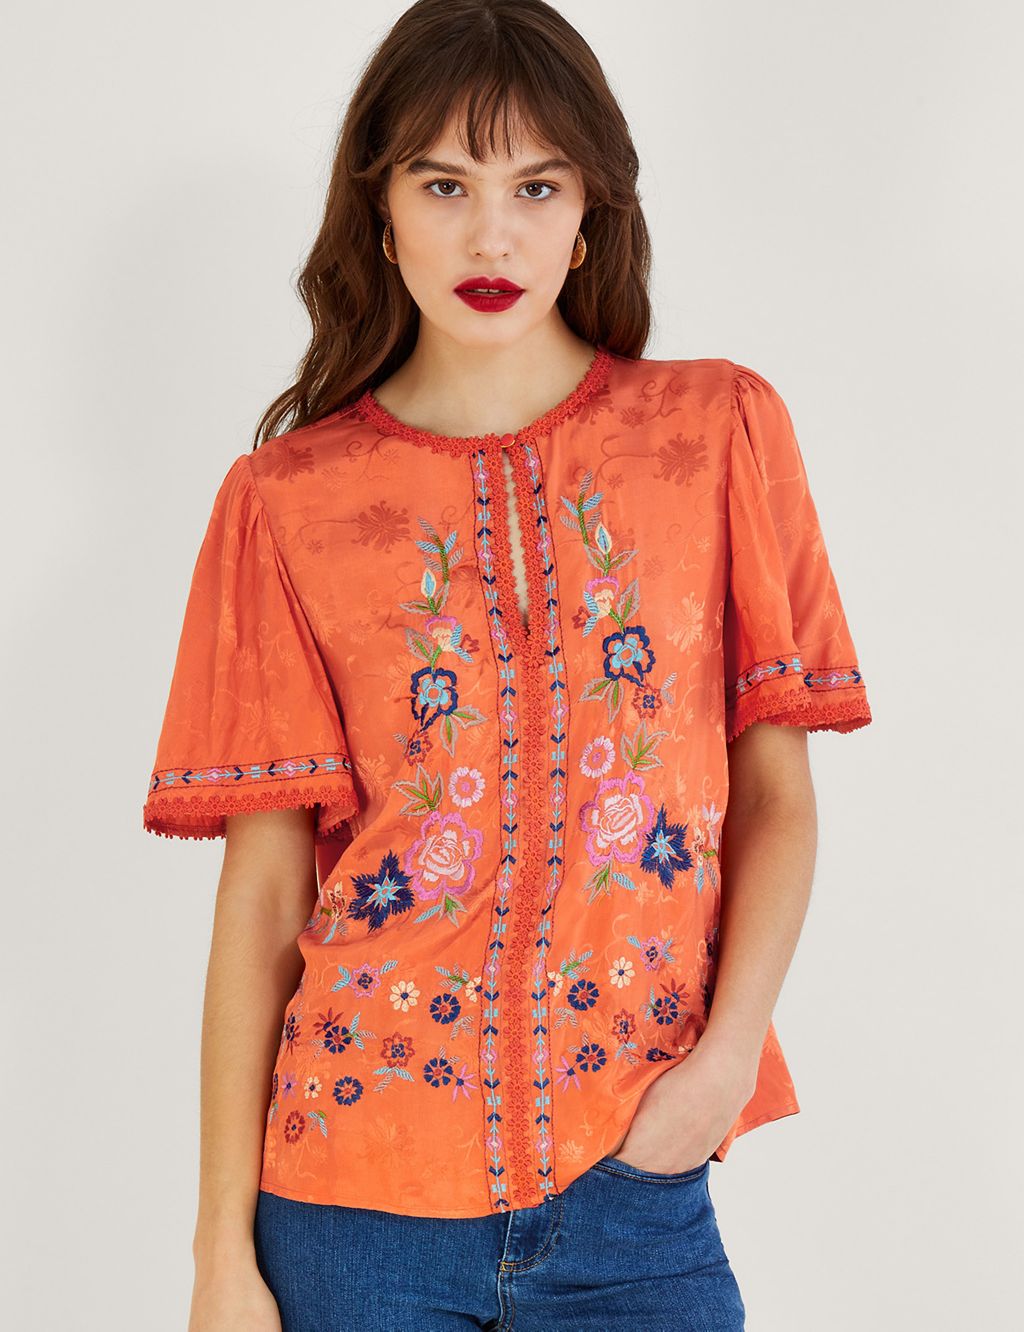 Embroidered Floral Round Neck Blouse image 1